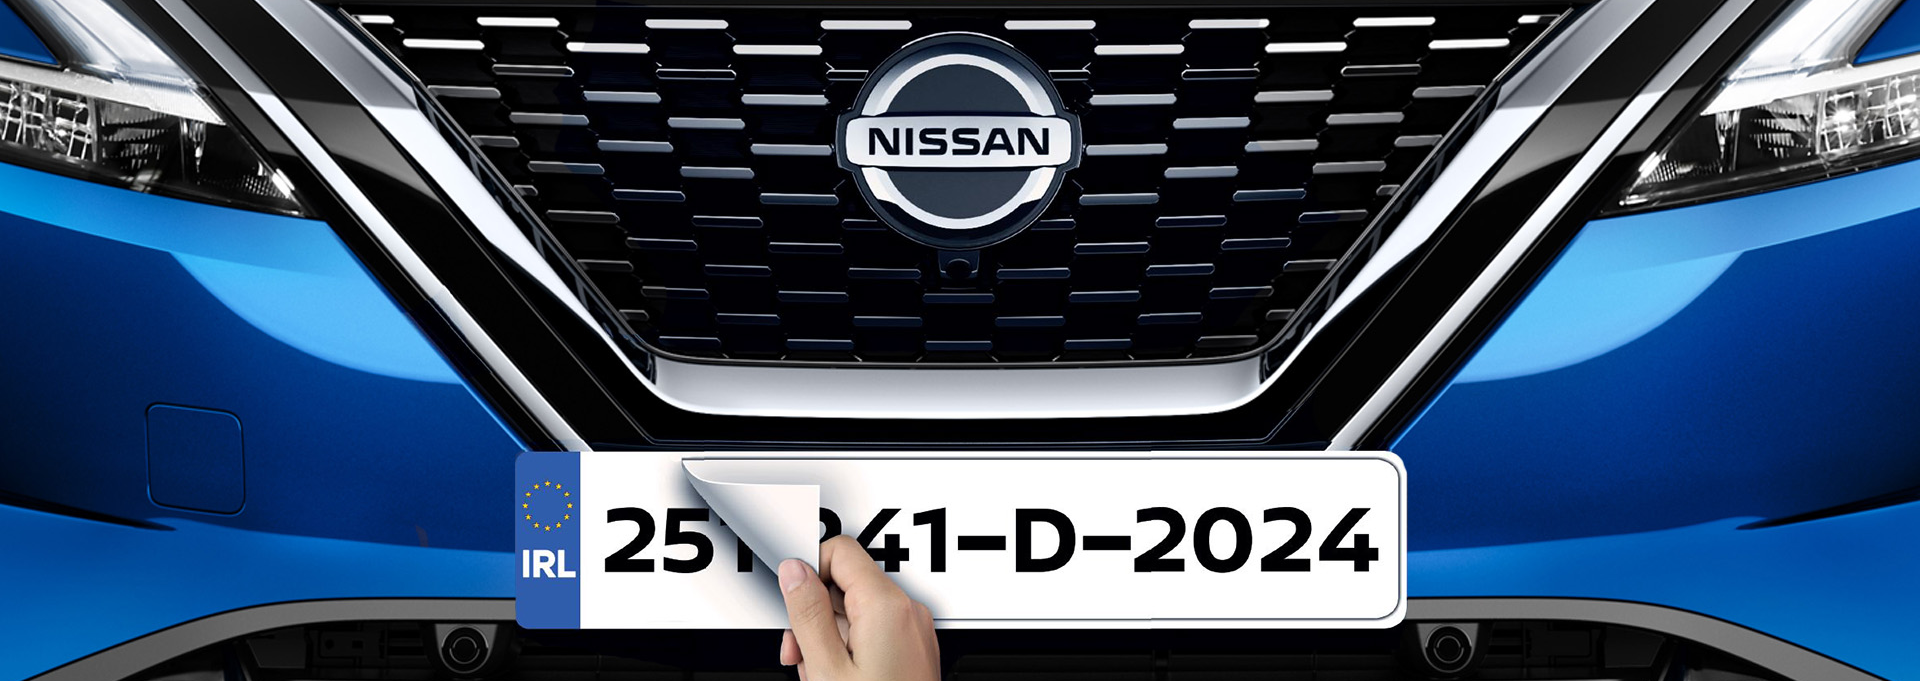 THE NISSAN 2-4-1 OFFER